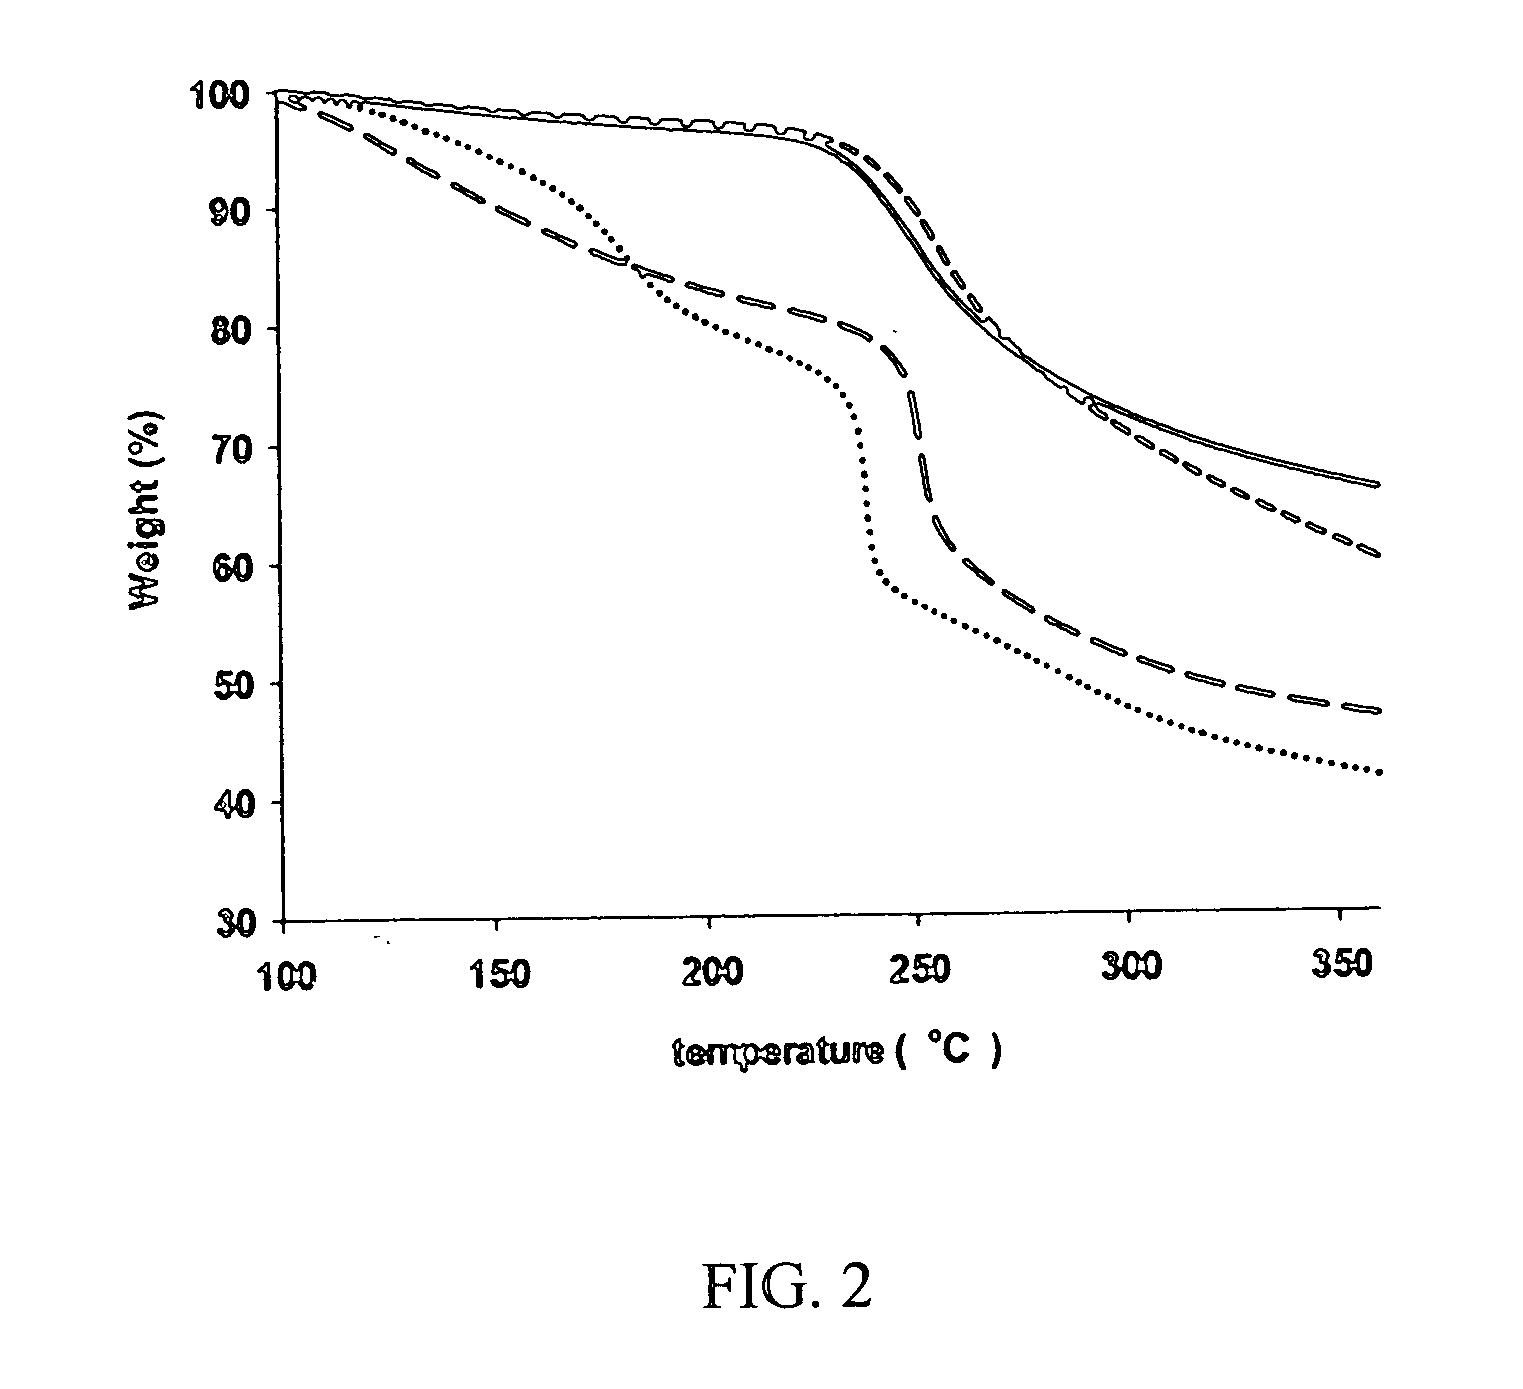 Drug formulation containing a solubilizer for enhancing solubility, absorption, and permeability